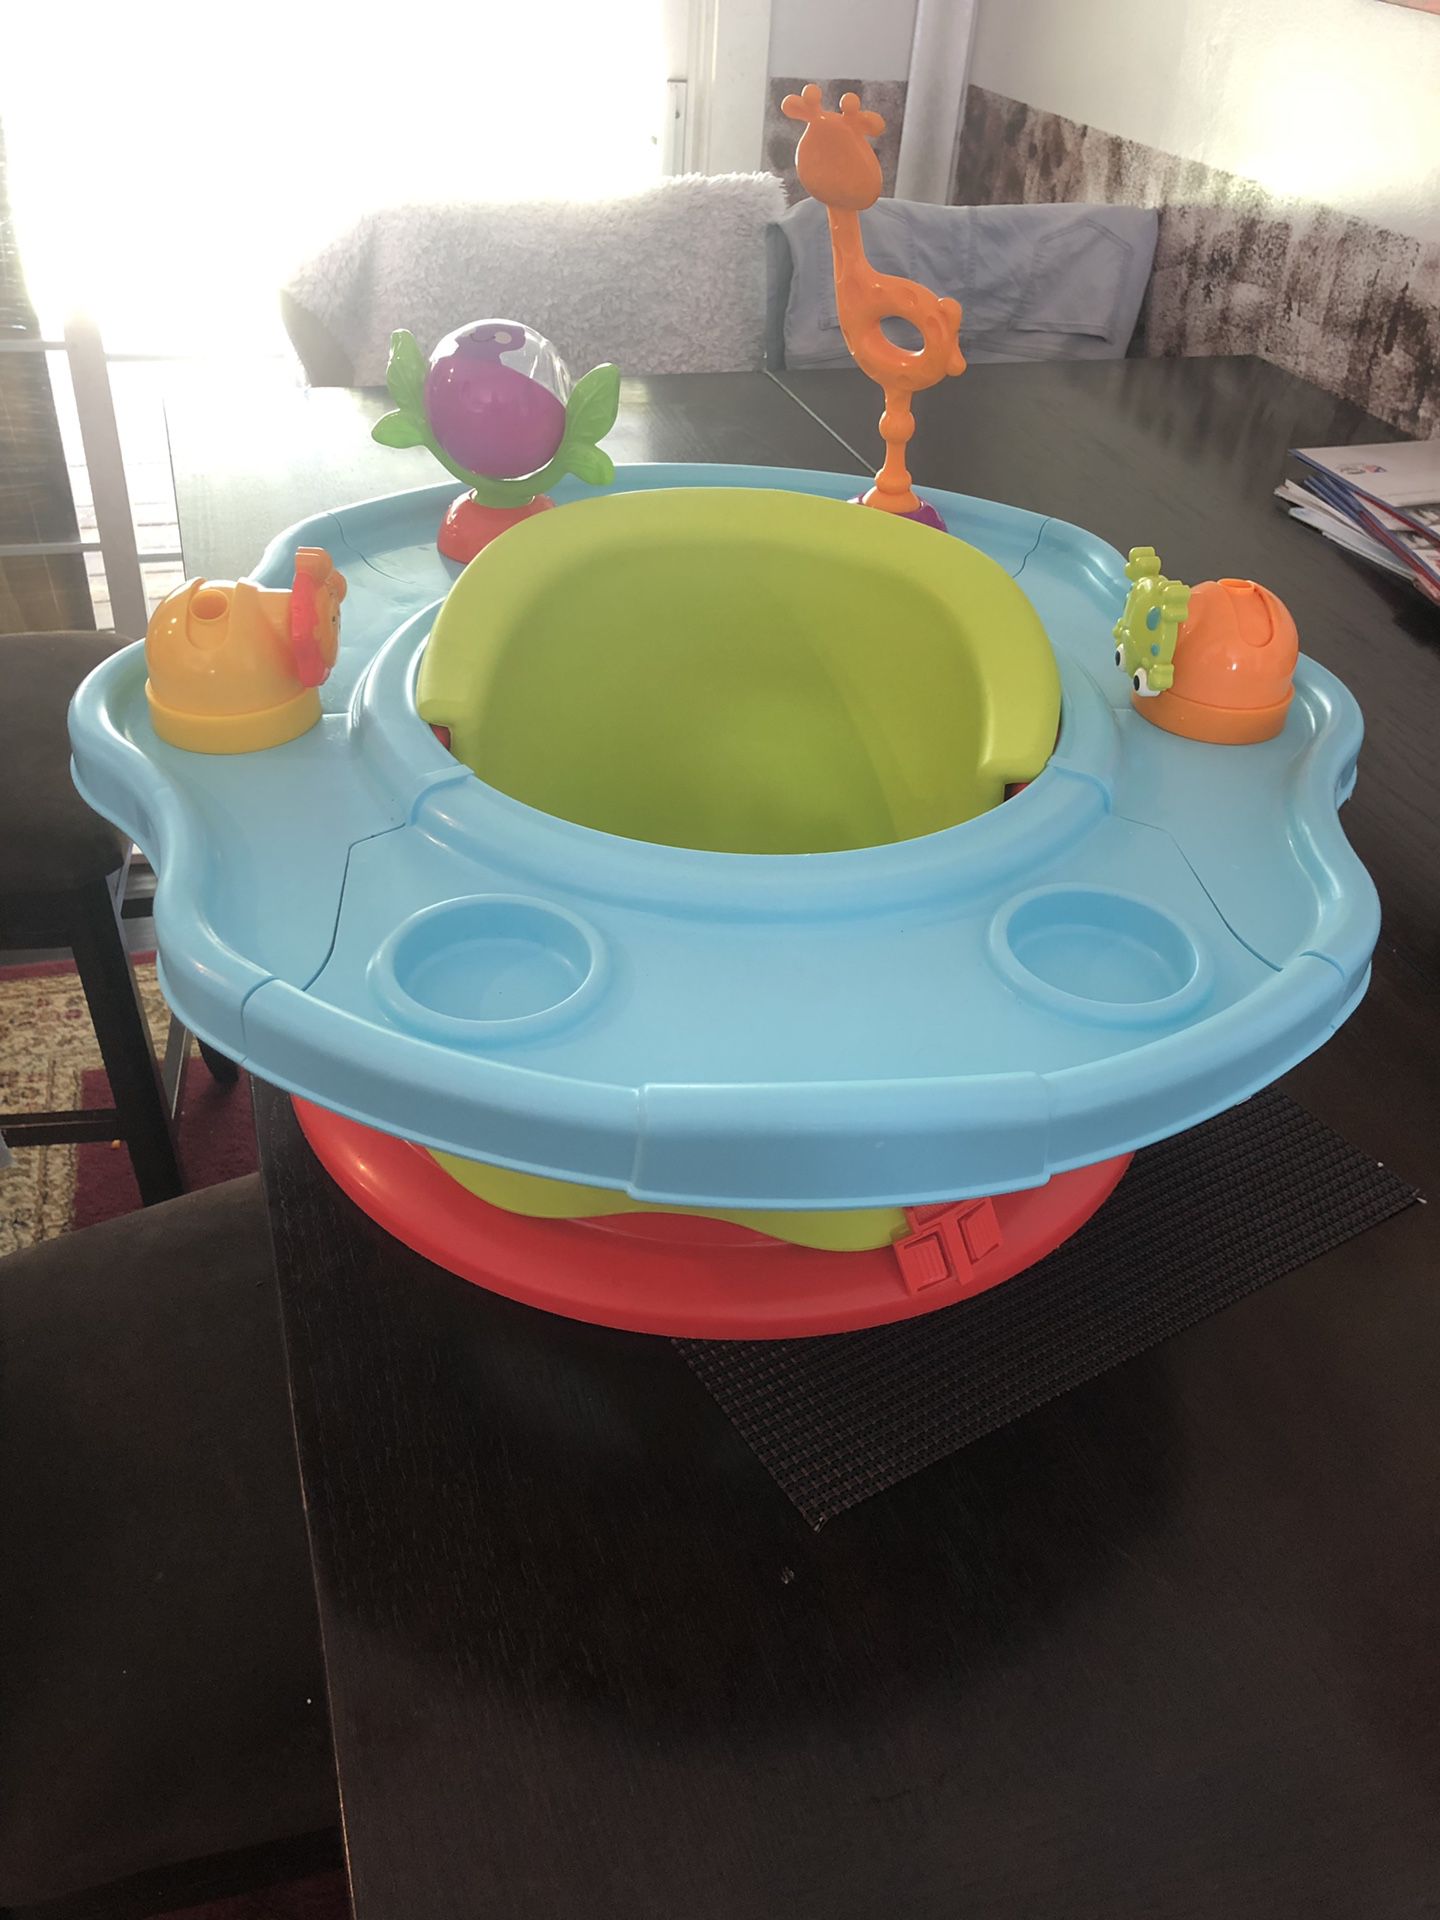 Infant/toddler feeding booster seat